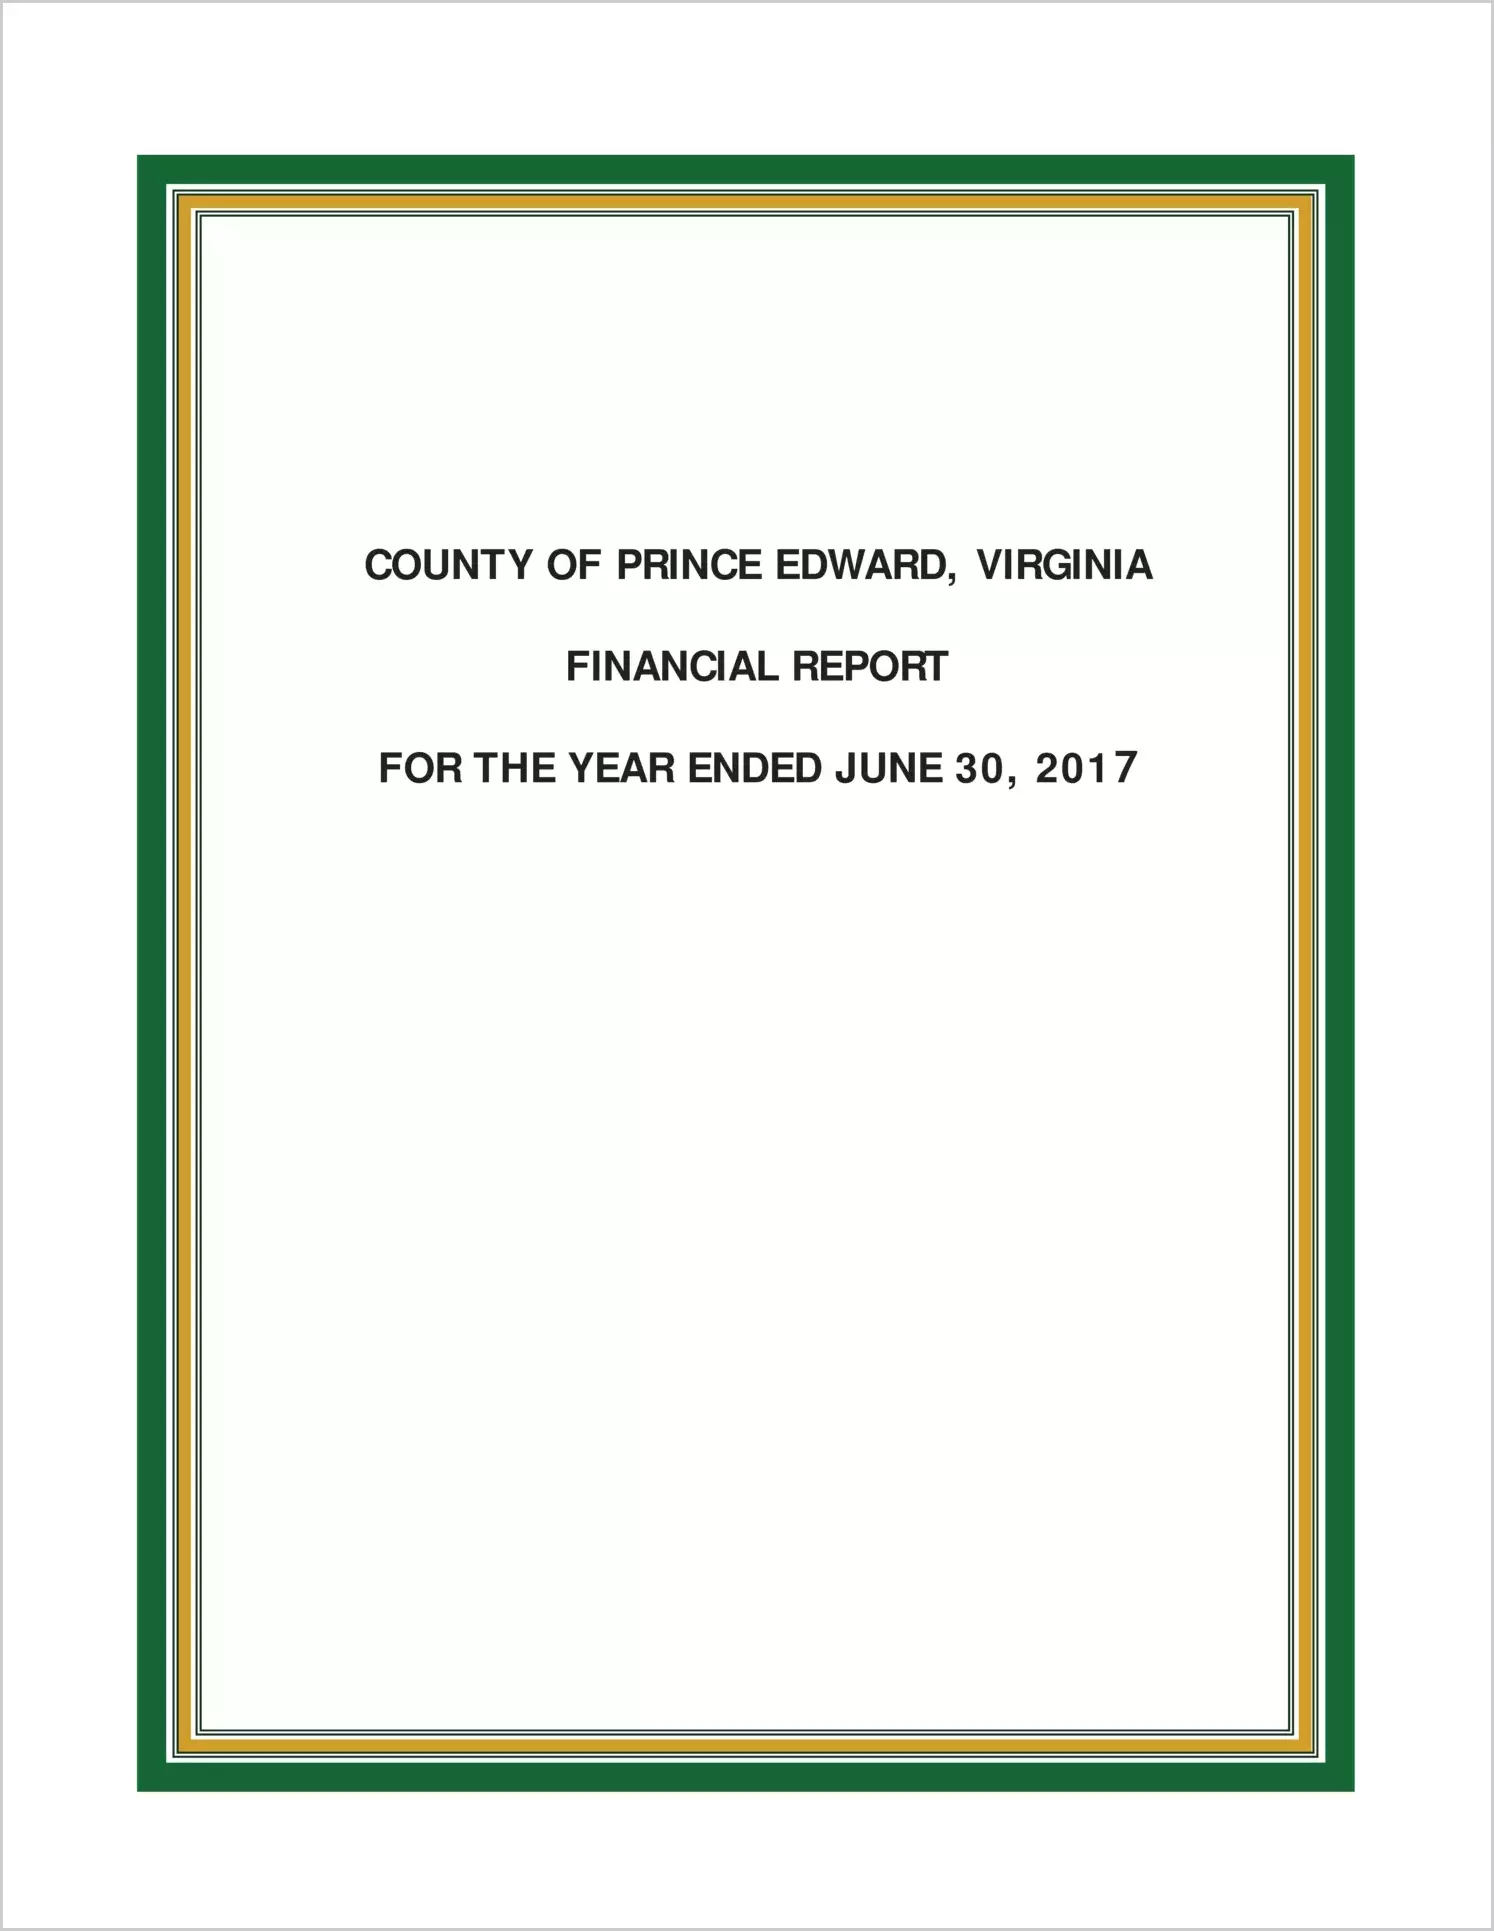 2017 Annual Financial Report for County of Prince Edward